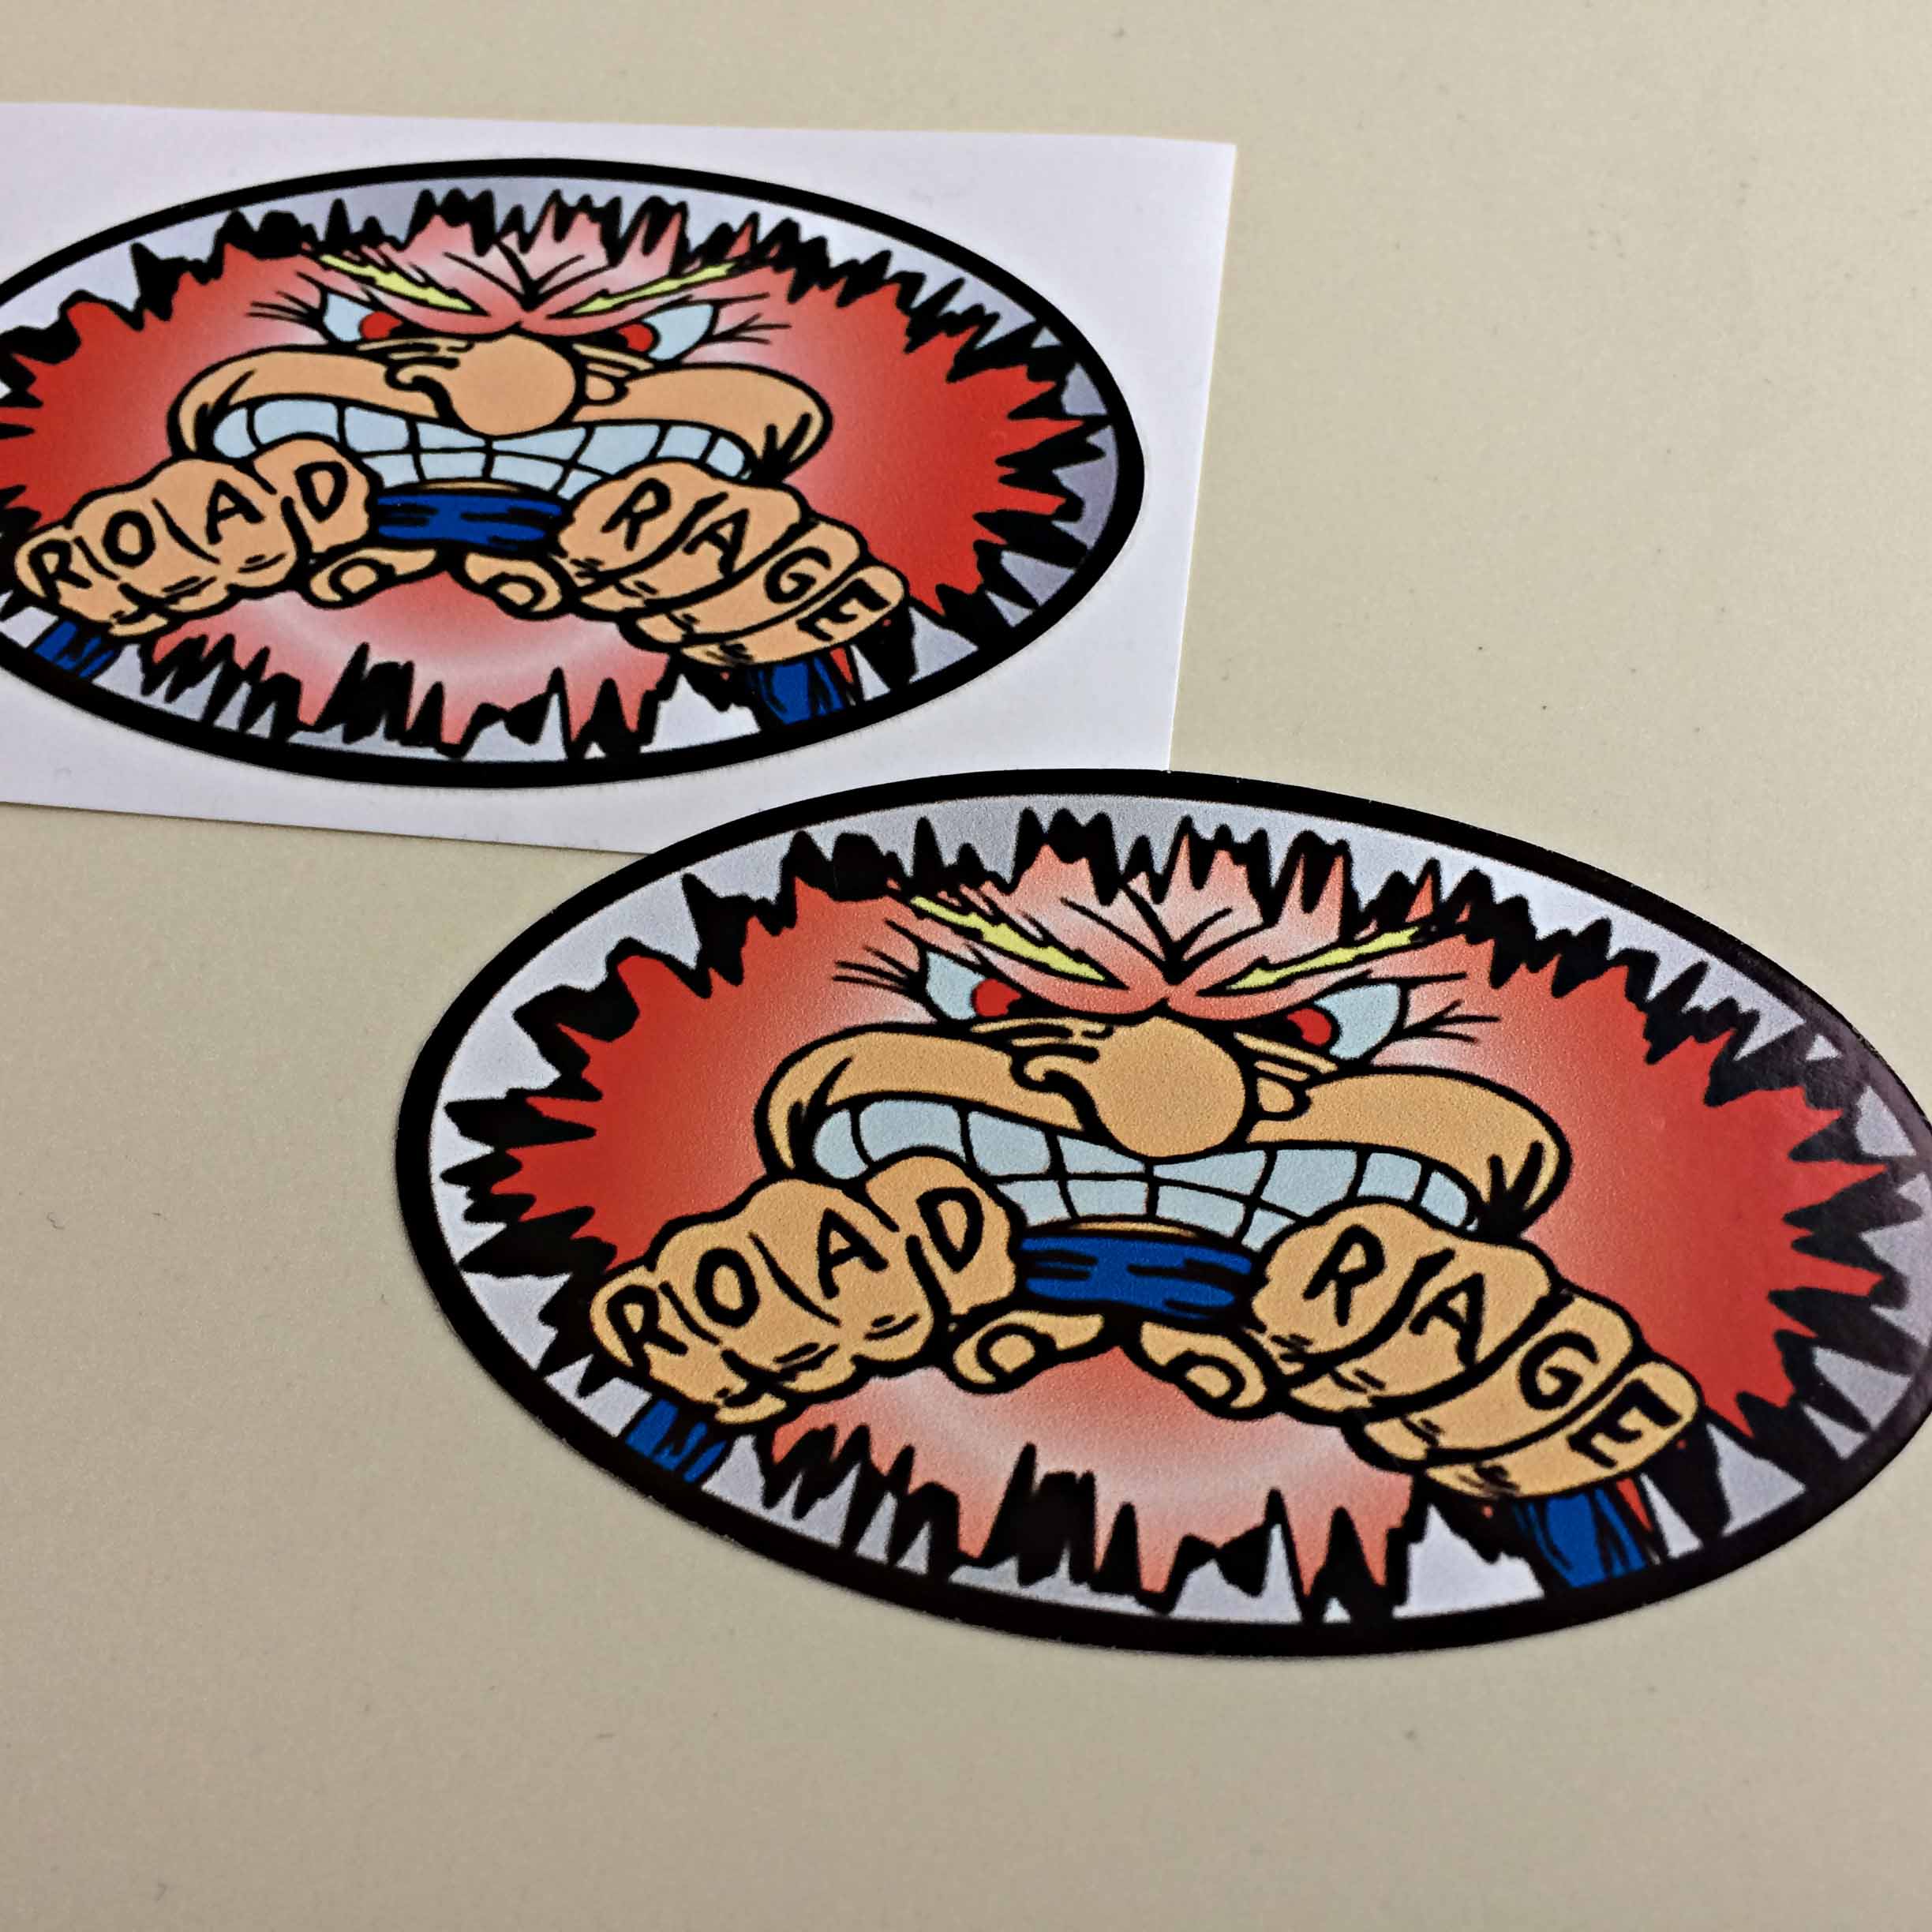 ROAD RAGE STICKERS. Road Rage is tattooed on the fingers of a man gripping a steering wheel. A humorous character. He has fuzzy red hair, red eyes and baring white teeth in anger.